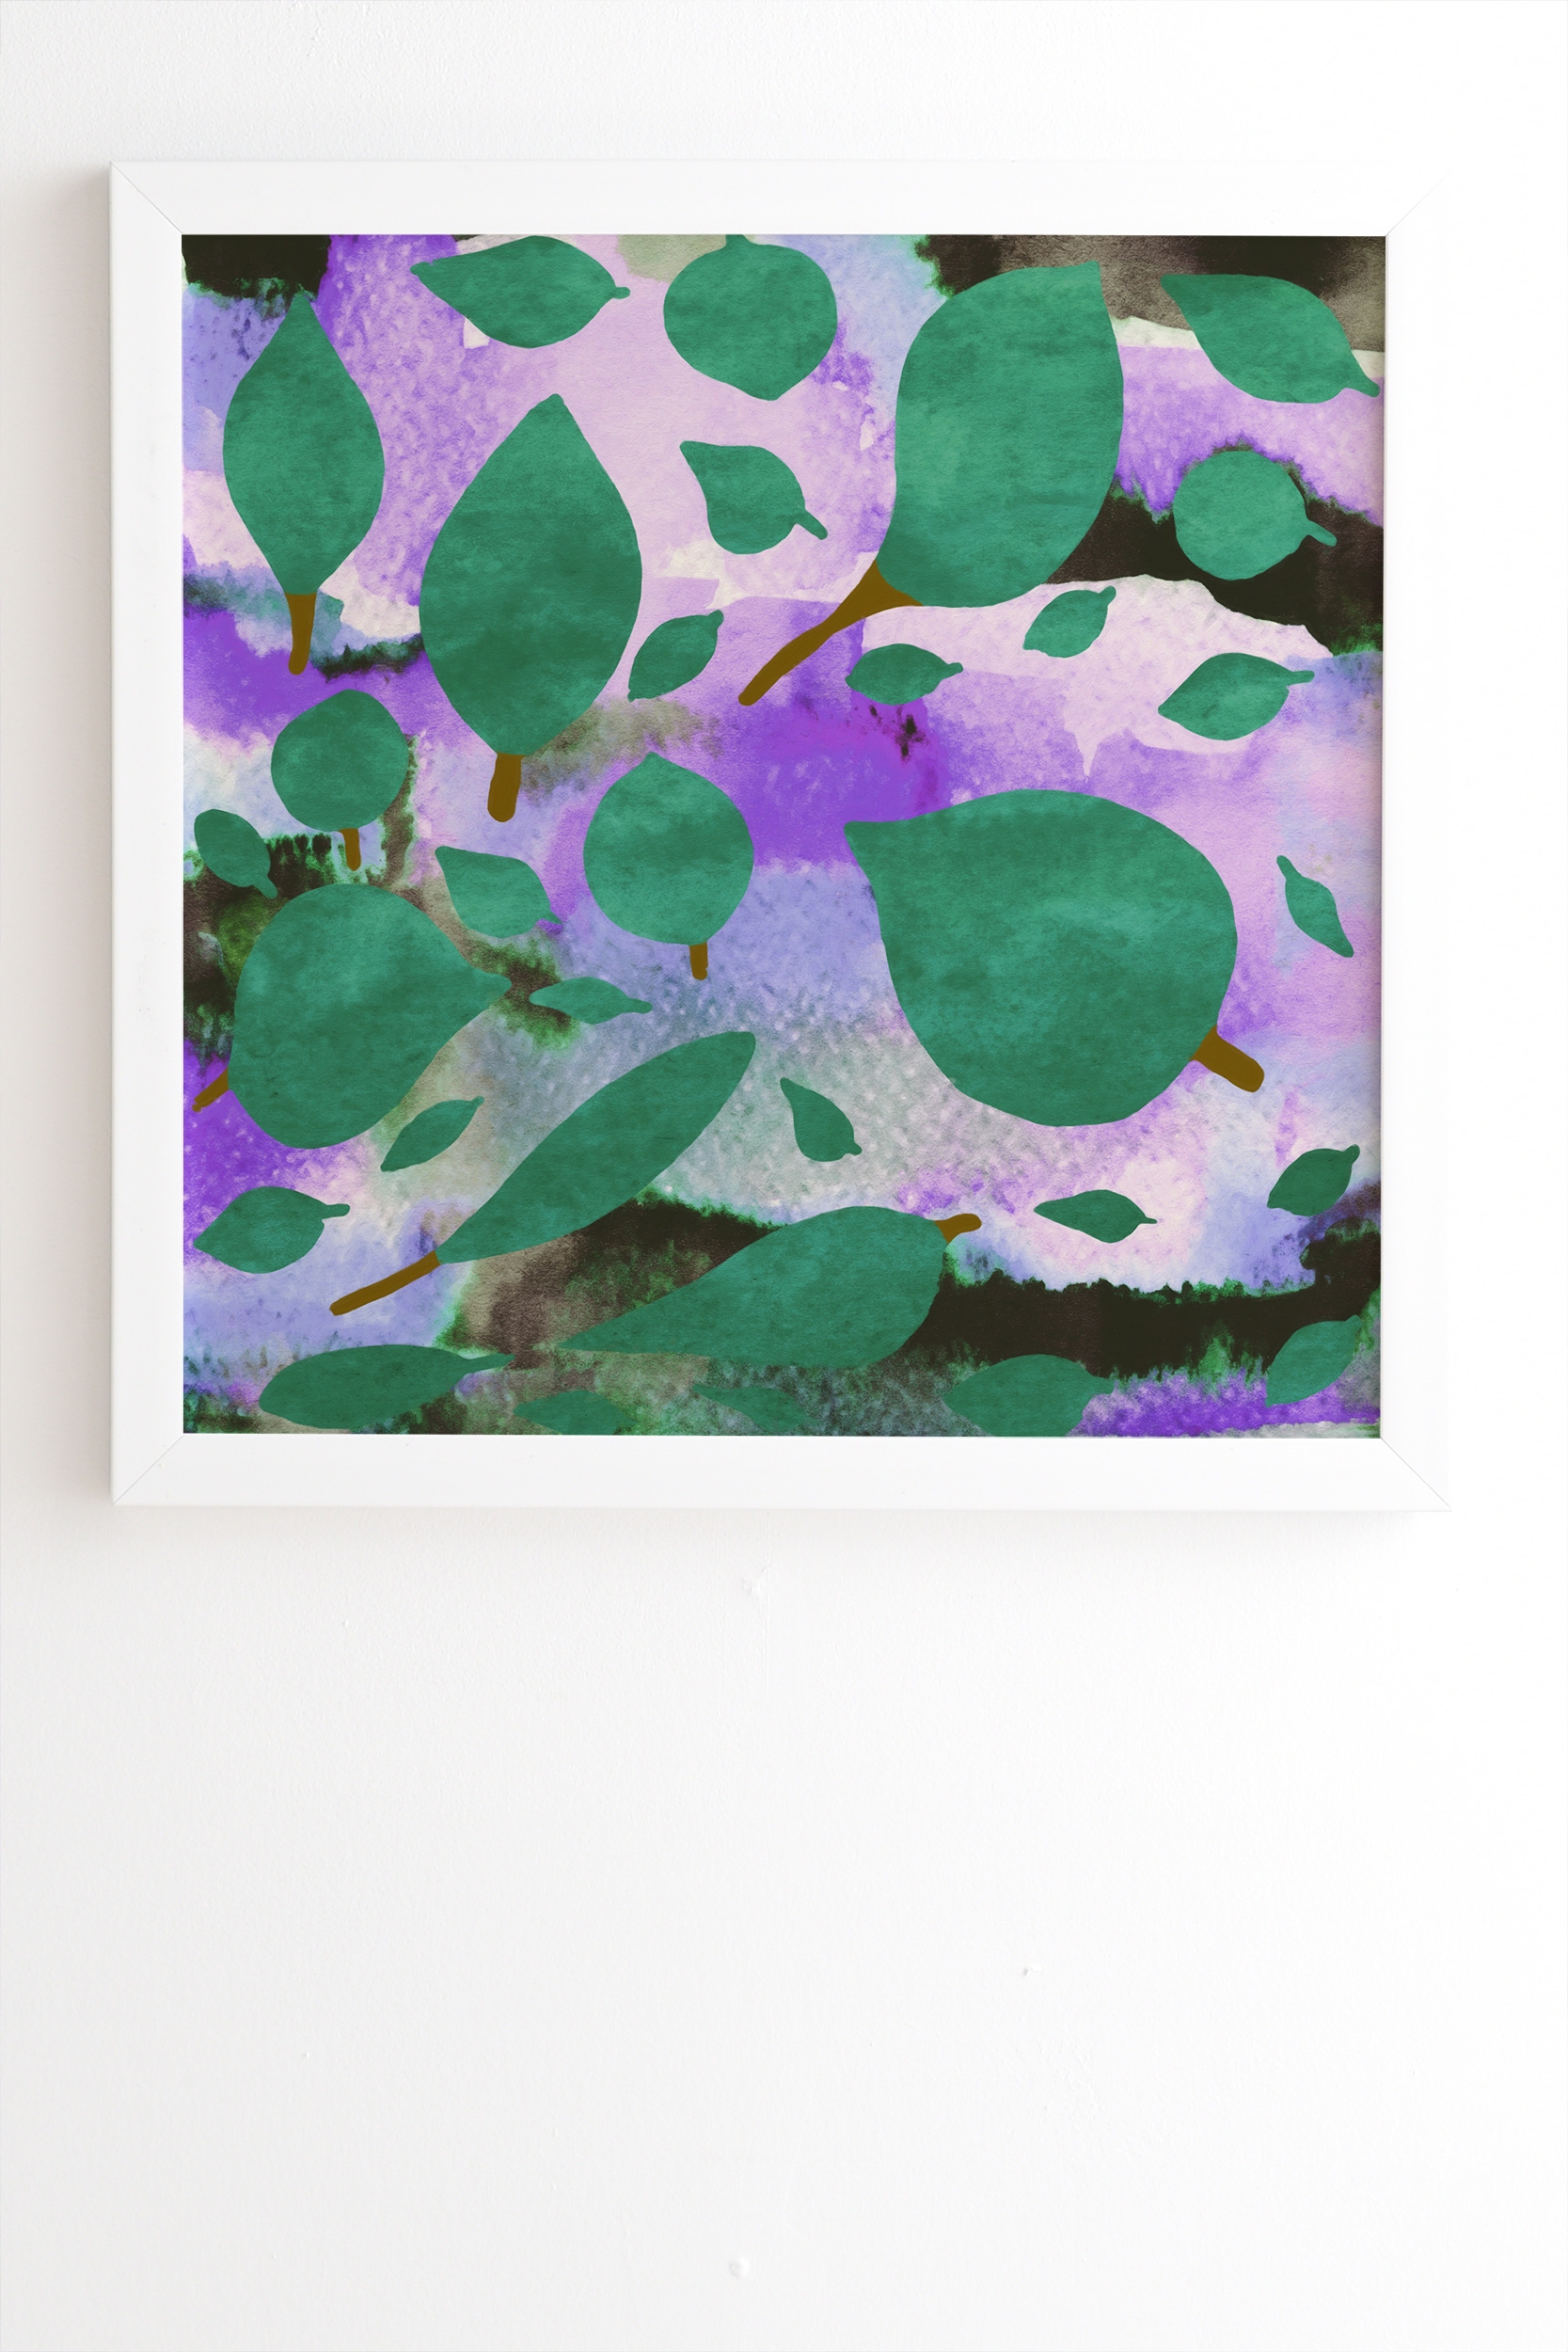 Leaves Green And Purple by Georgiana Paraschiv - Framed Wall Art Basic White 20" x 20" - Image 1